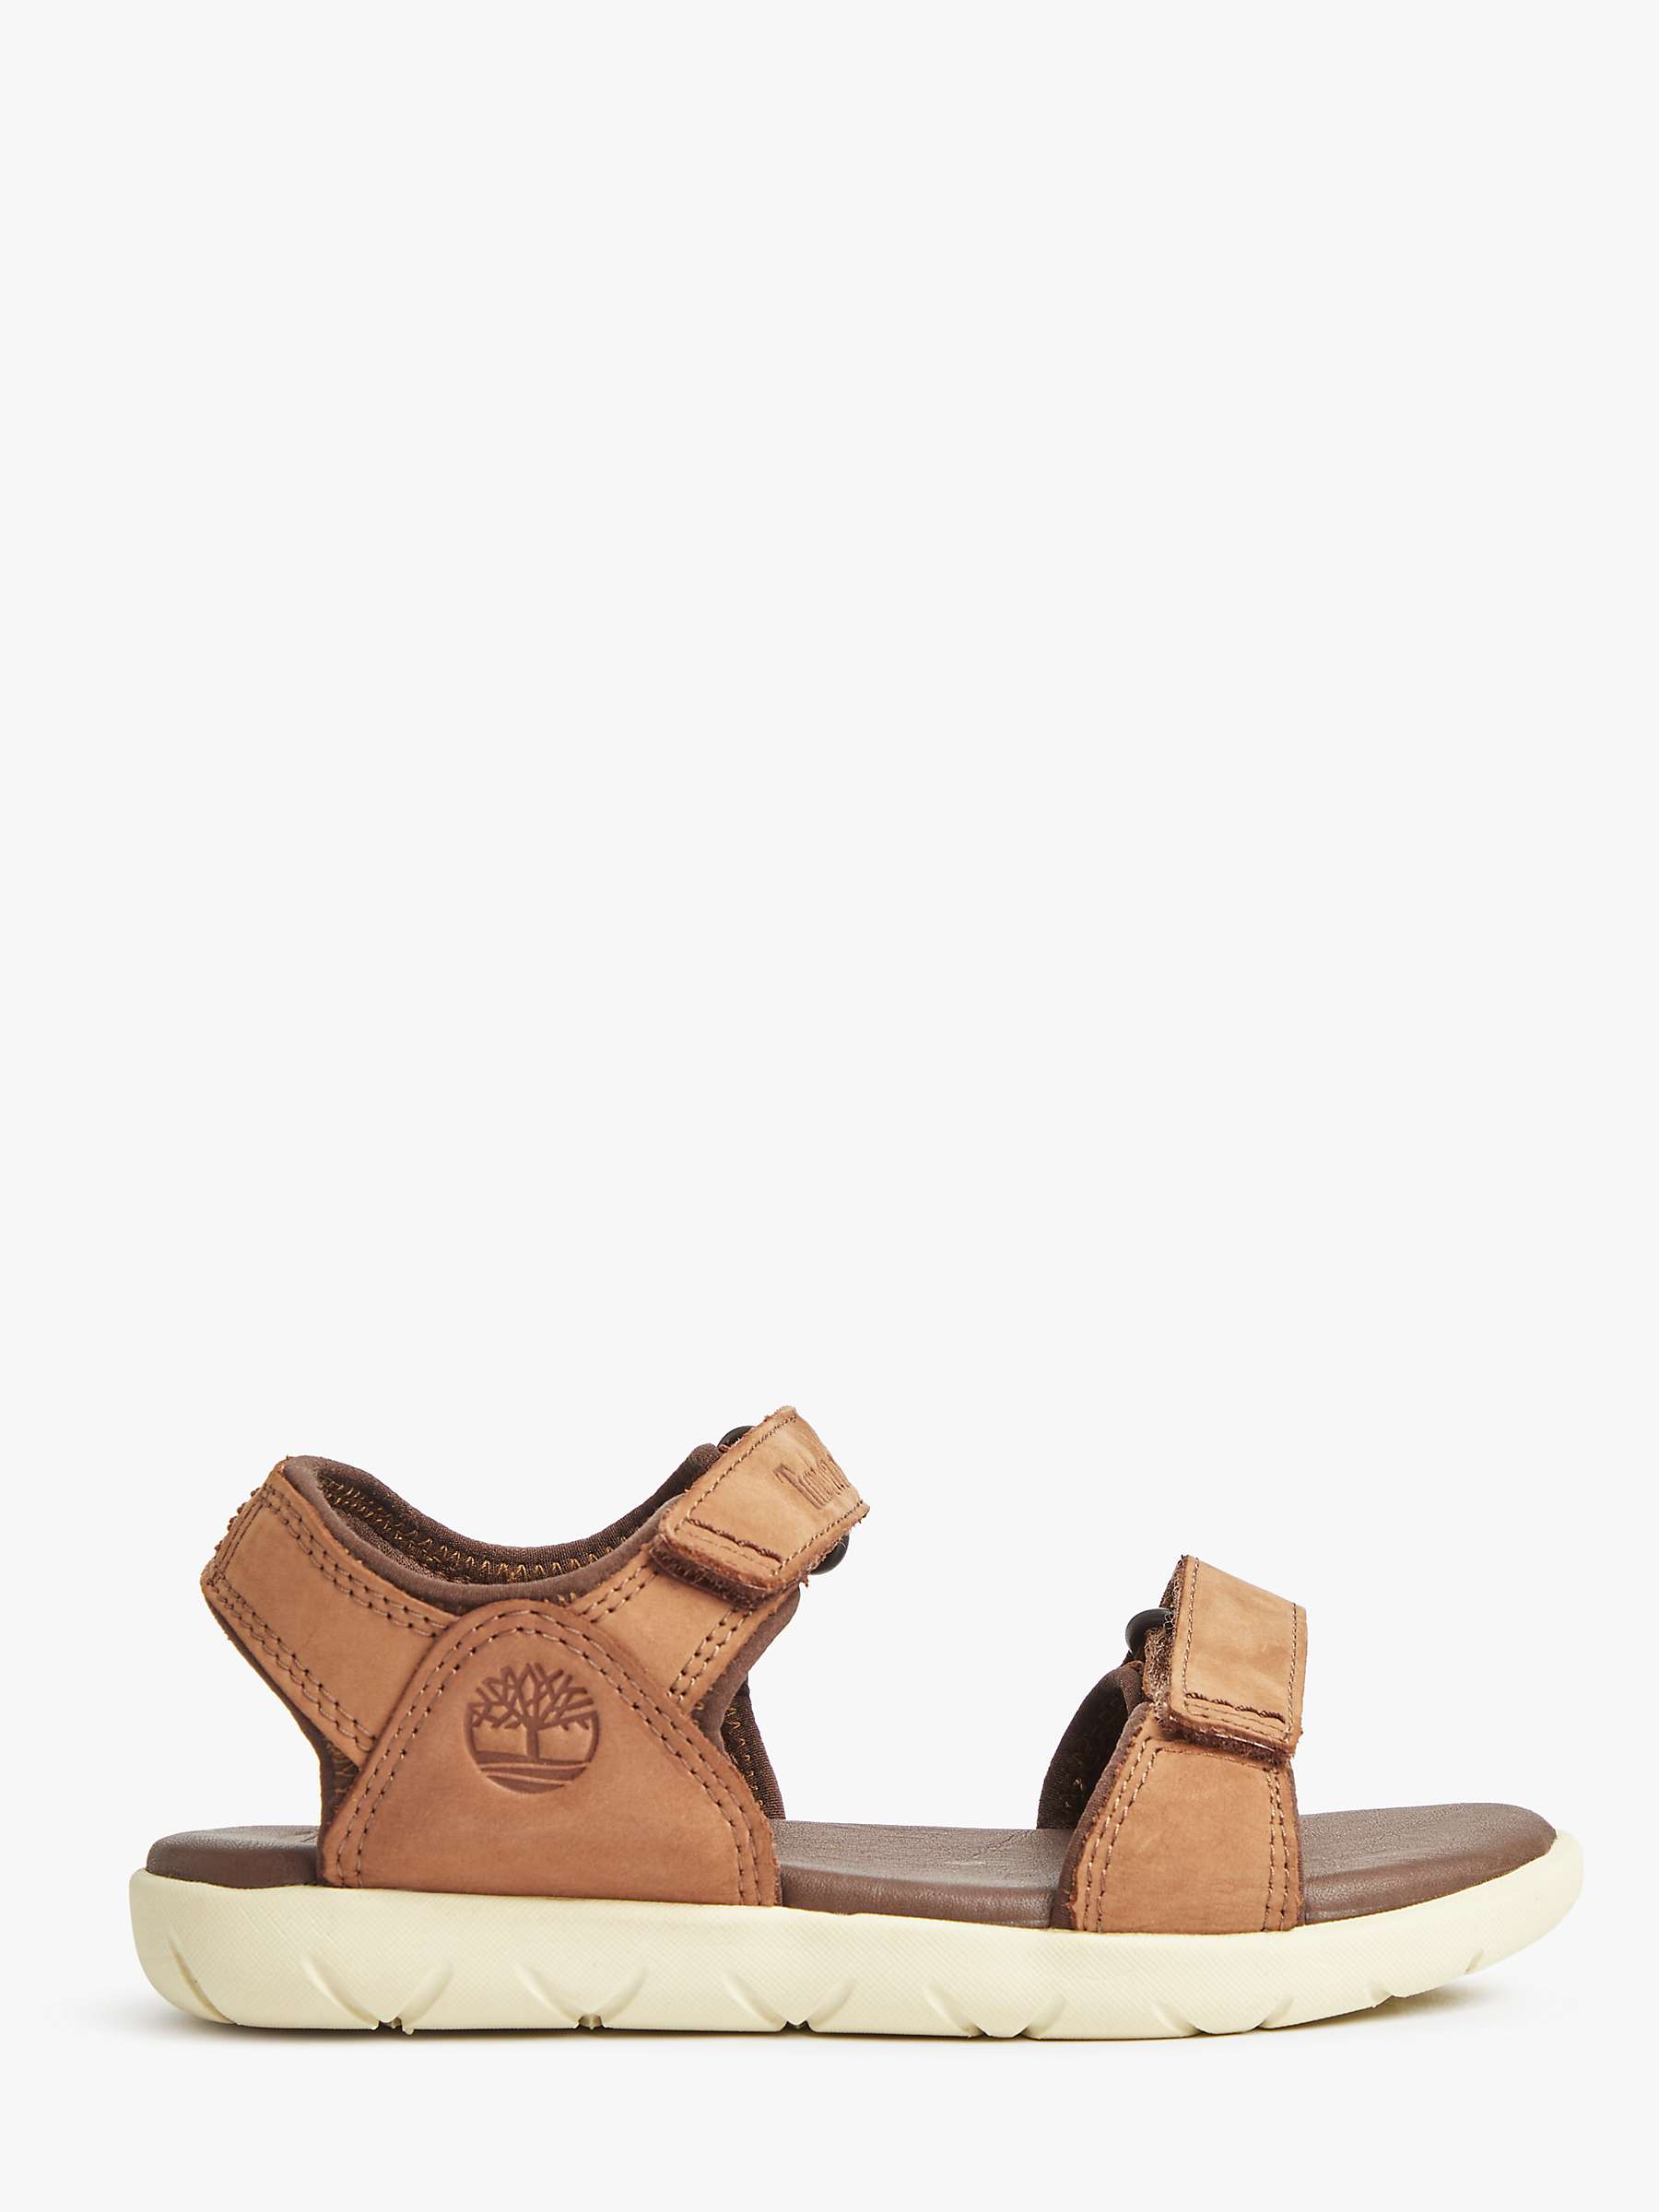 Buy Timberland Children's Nubble Double Strap Sandals, Brown Online at johnlewis.com